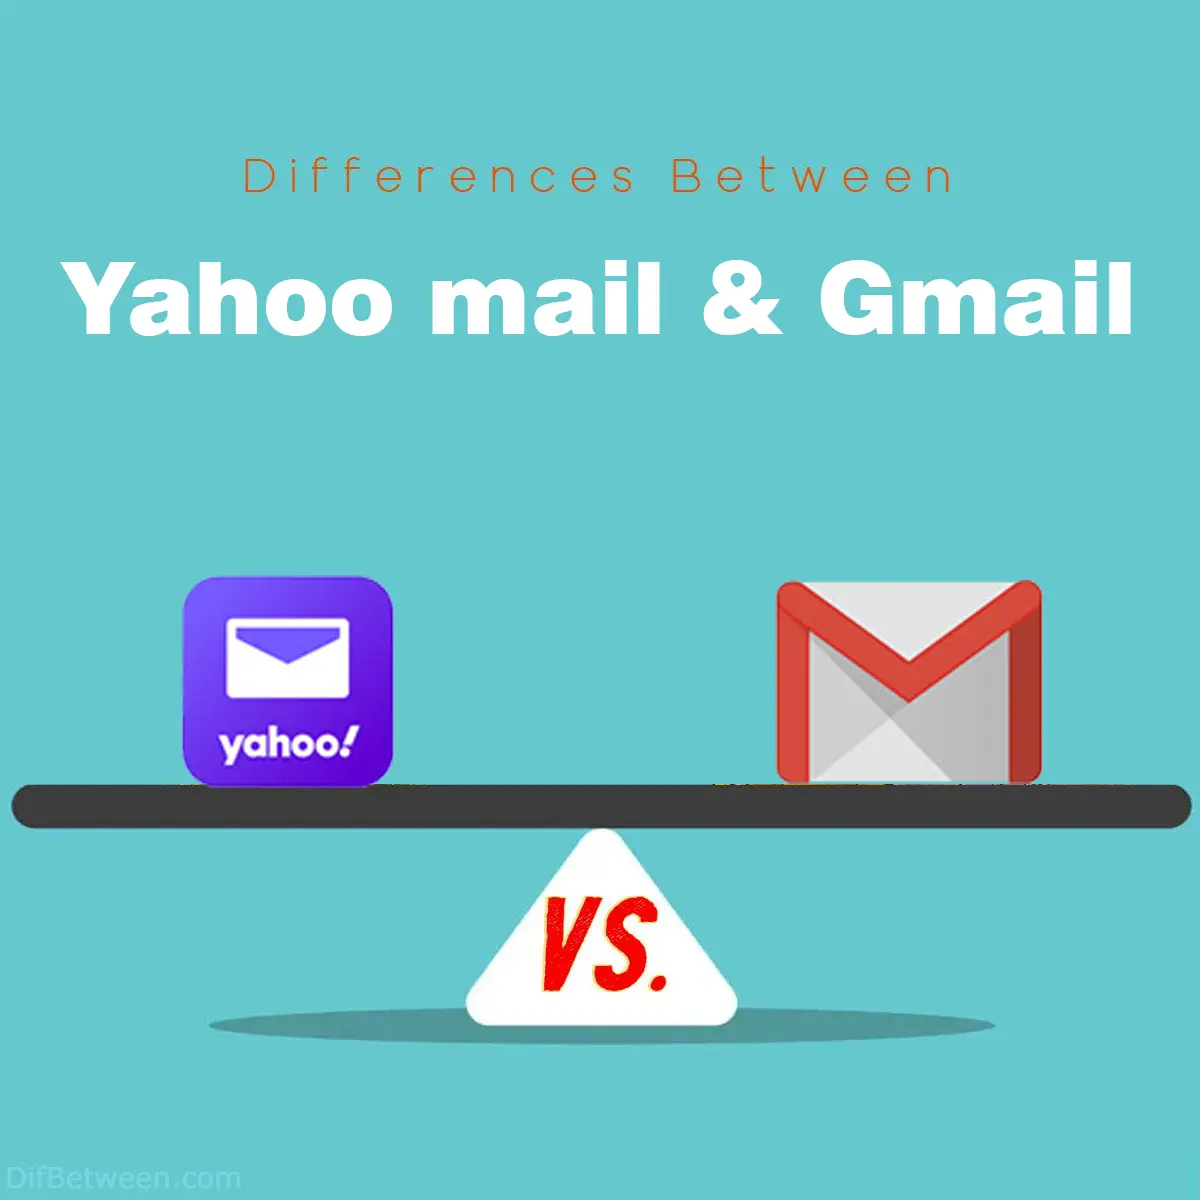 Differences Between Yahoo mail and Gmail